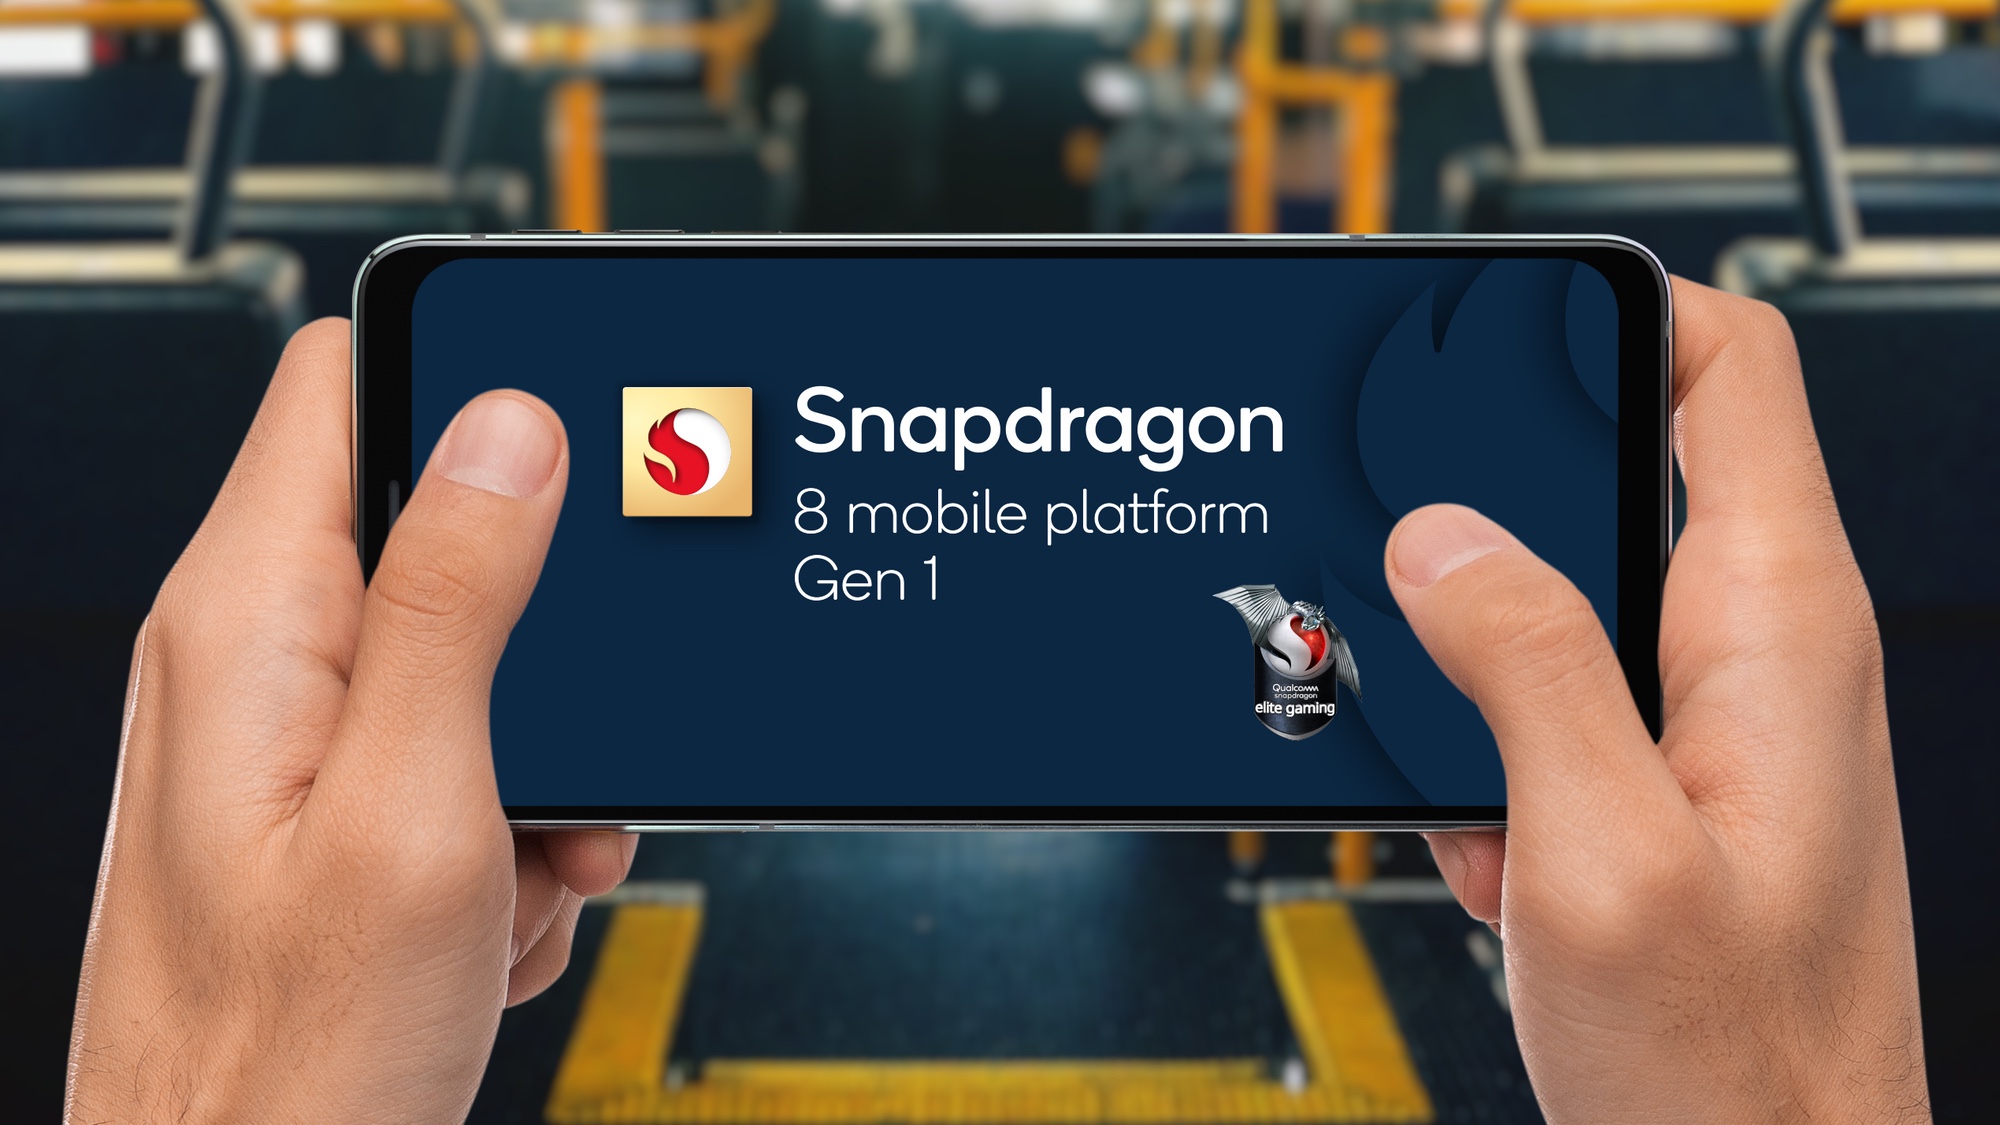 Snapdragon 8 Gen 1 logo on a phone held in two hands (like a gaming controller), by someone sitting on a bus